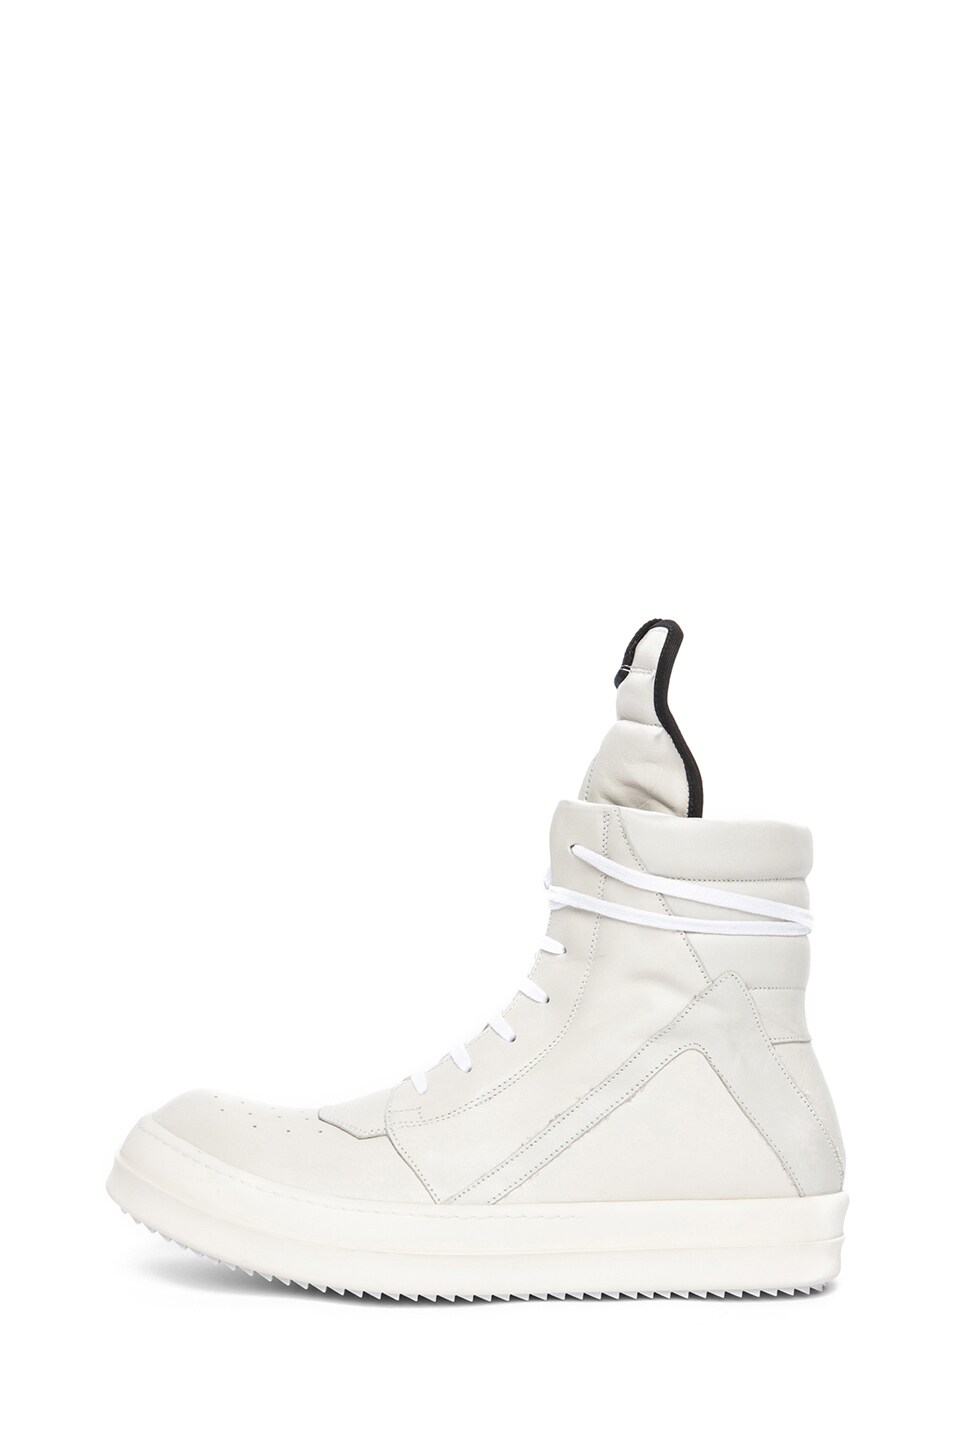 Image 1 of Rick Owens Geobasket Leather Sneaker in White & White